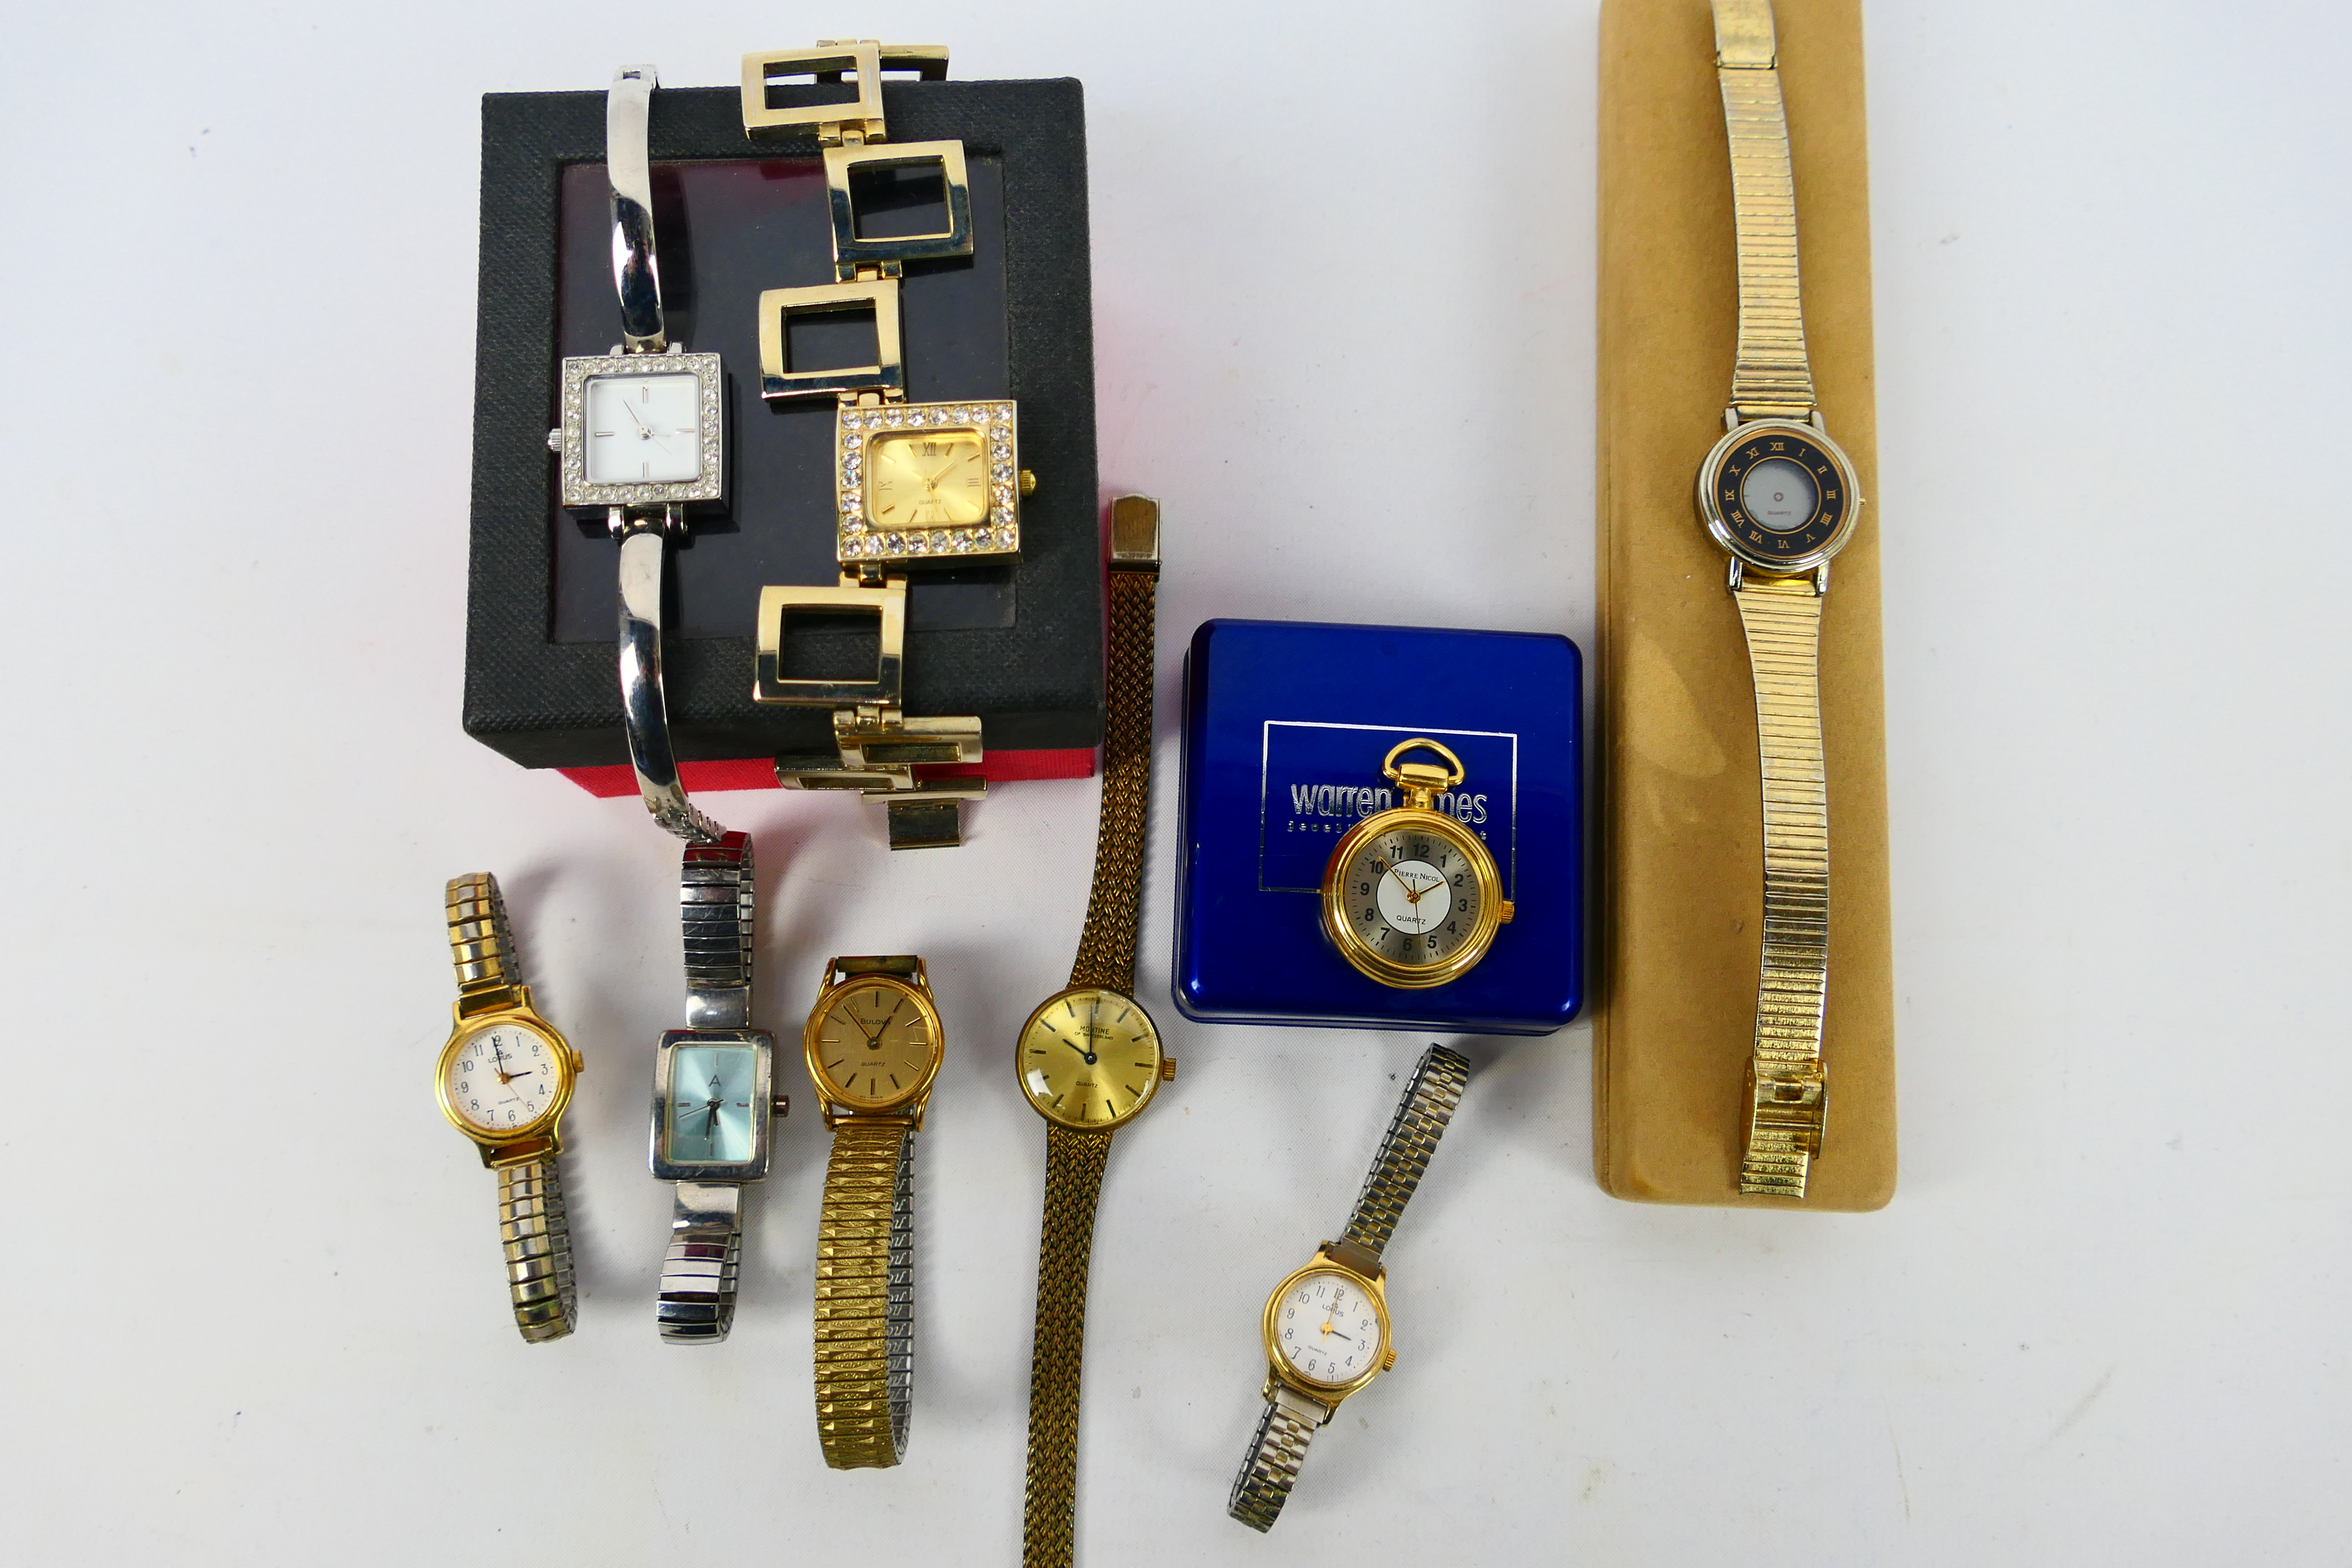 A collection of various wrist watches and similar.